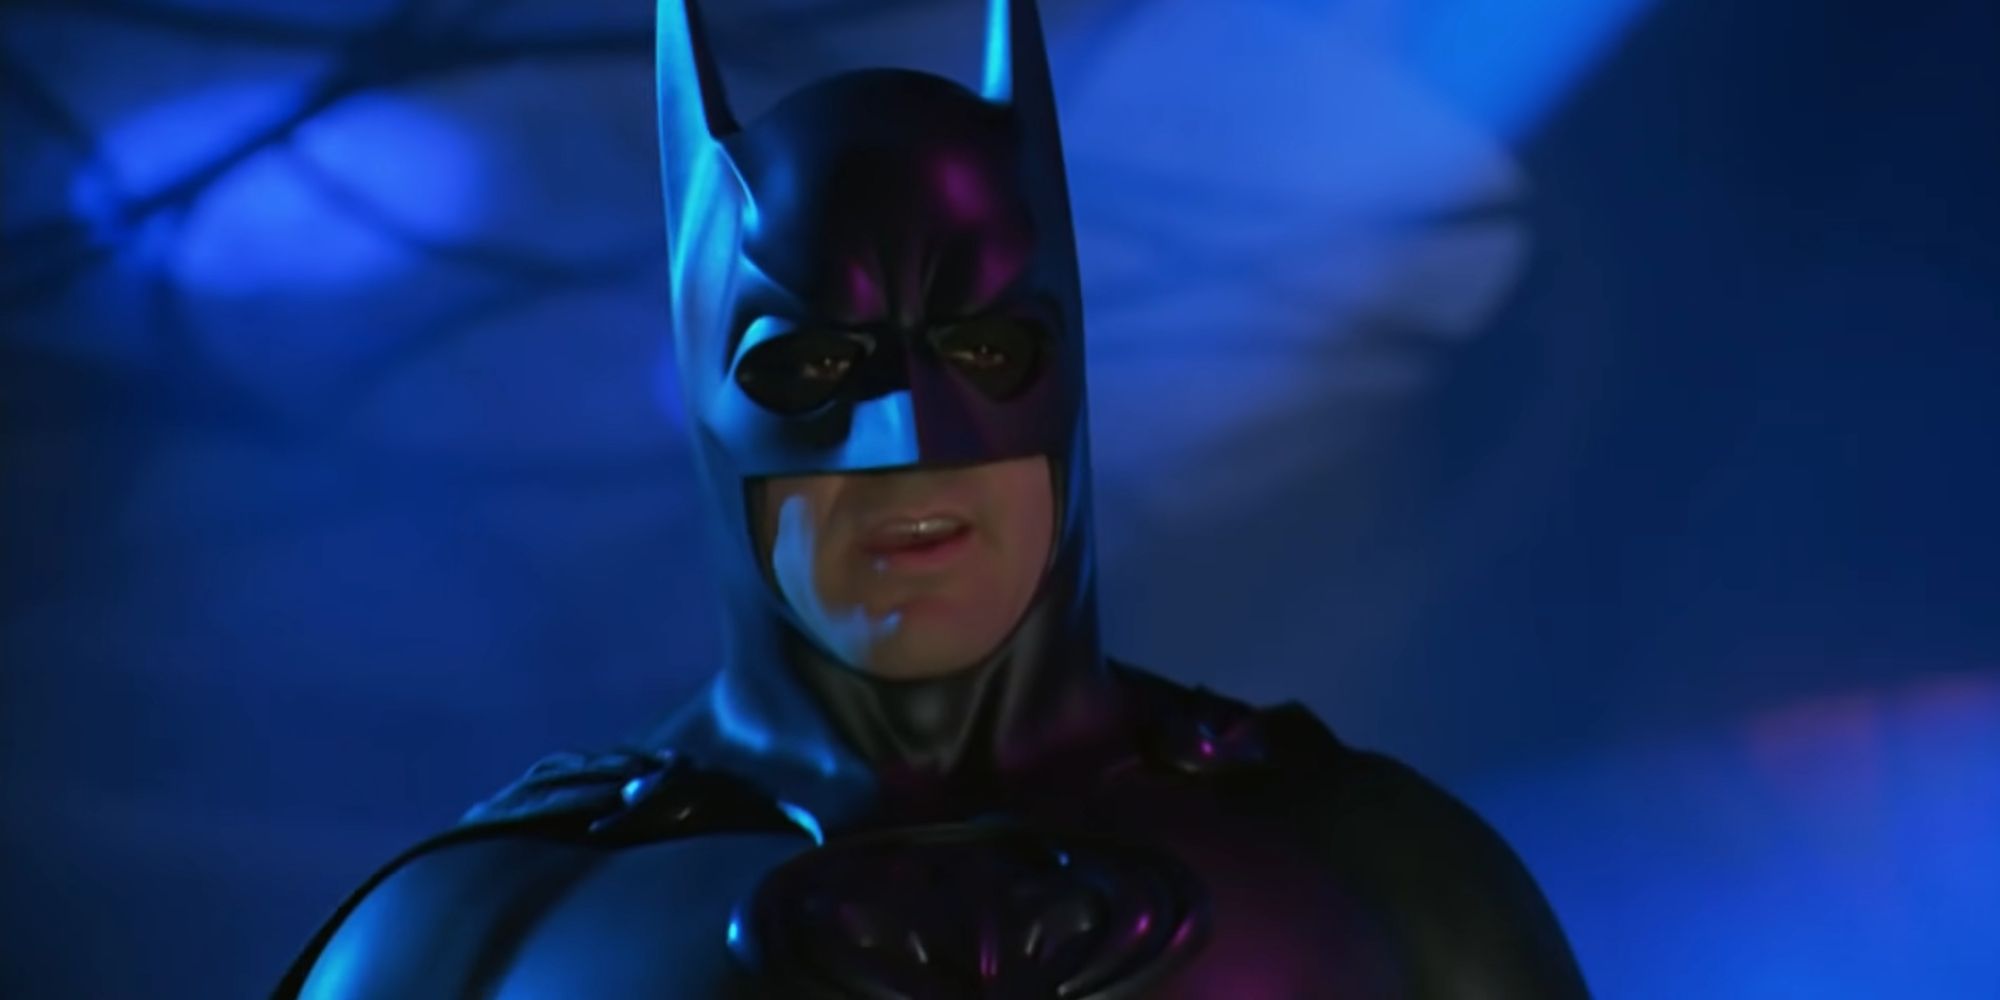 George Clooney as Batman making his entrance in Batman And Robin